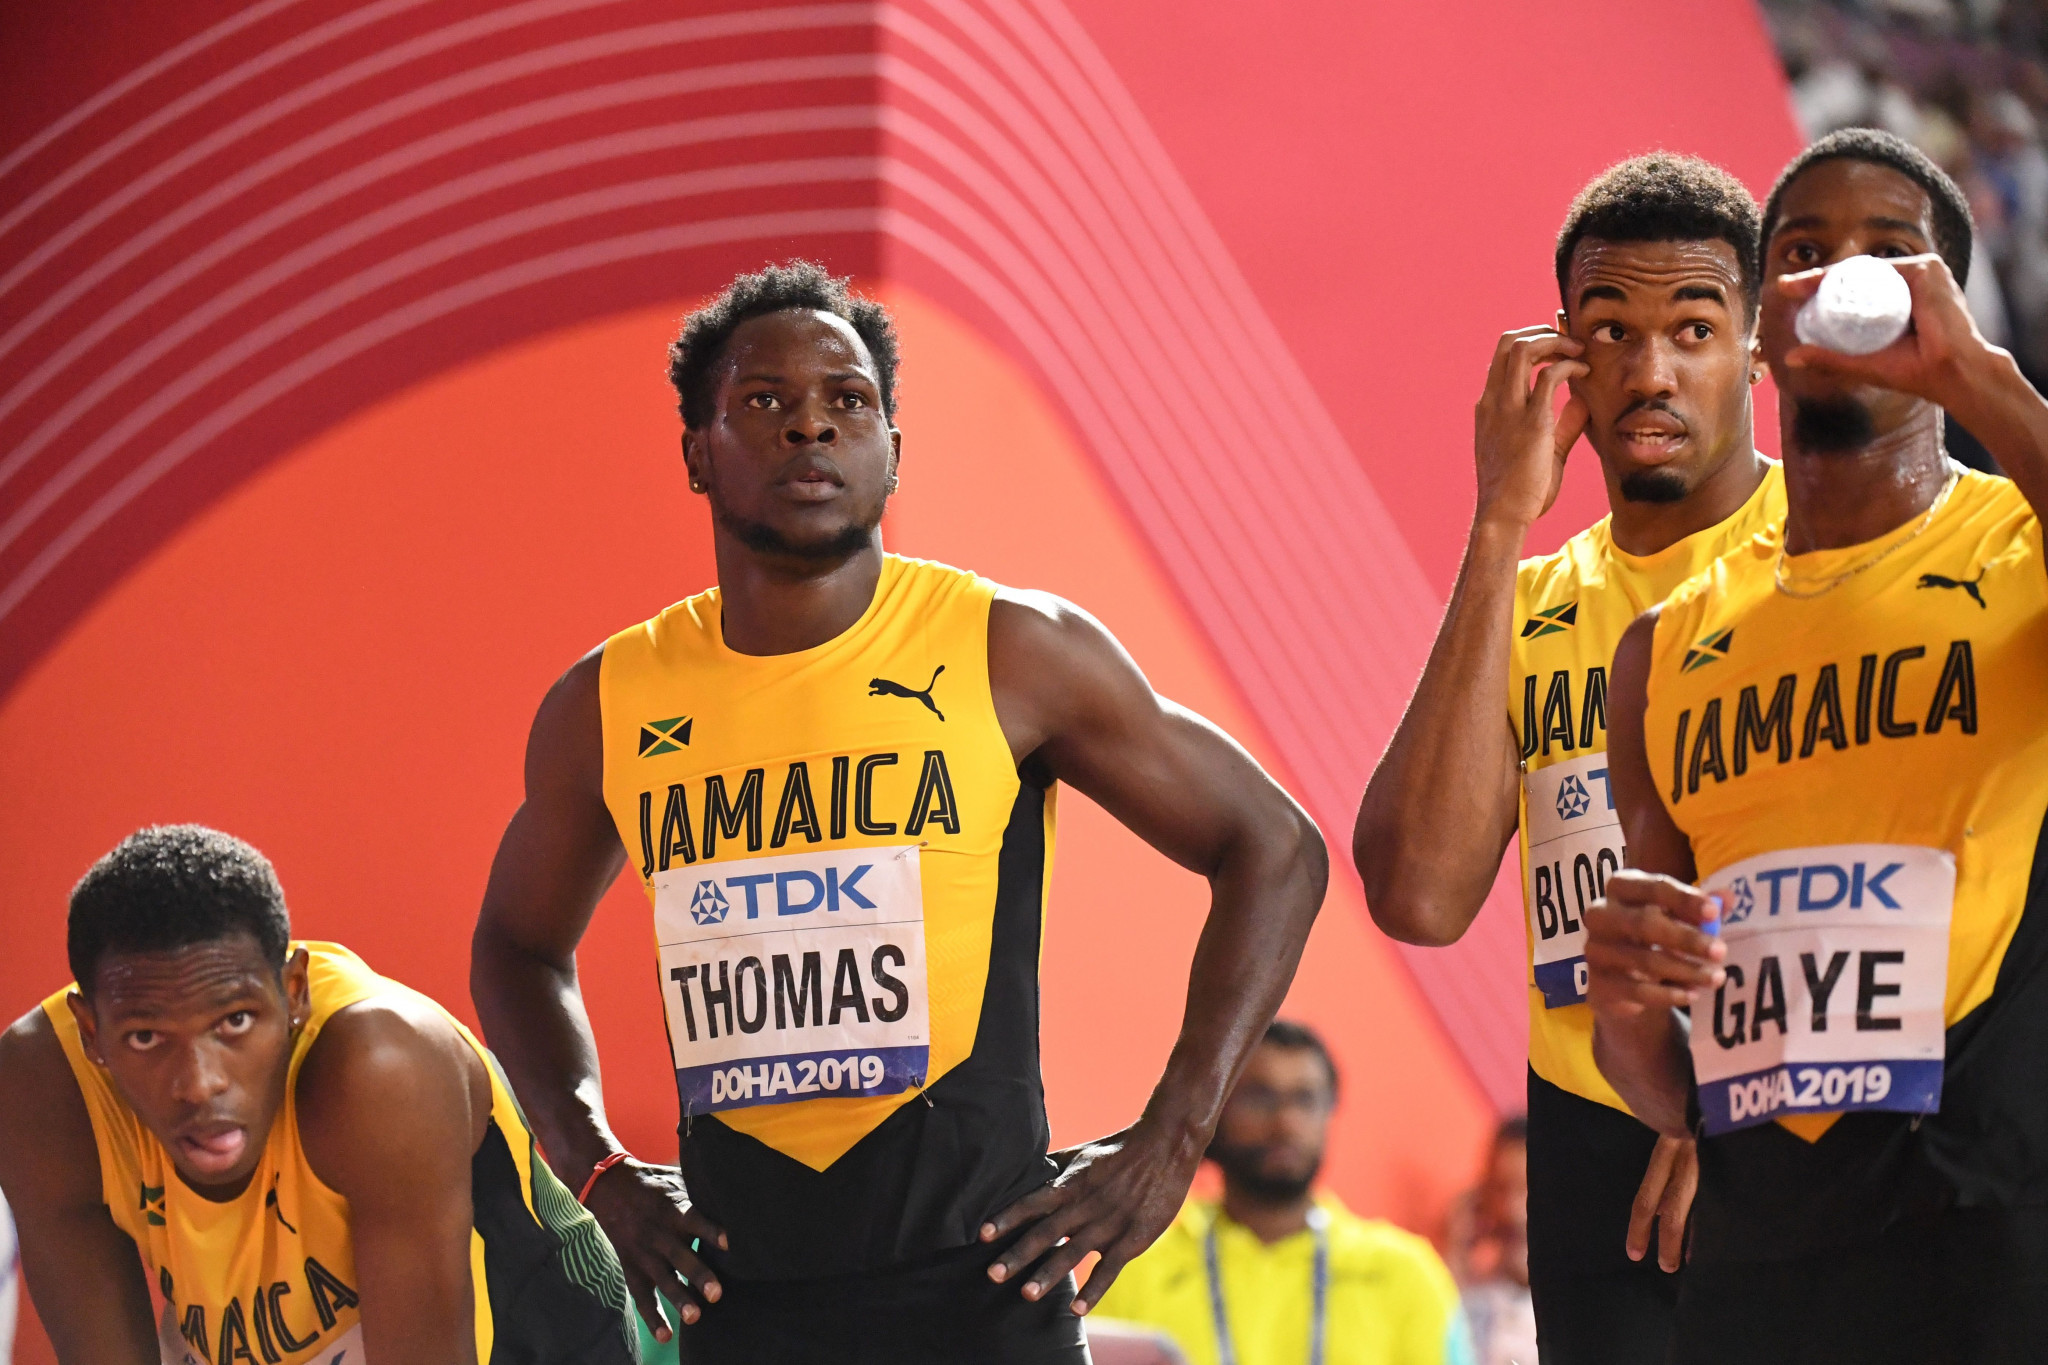 Jamaica announced its withdrawal from the World Athletics Relays recently ©Getty Images